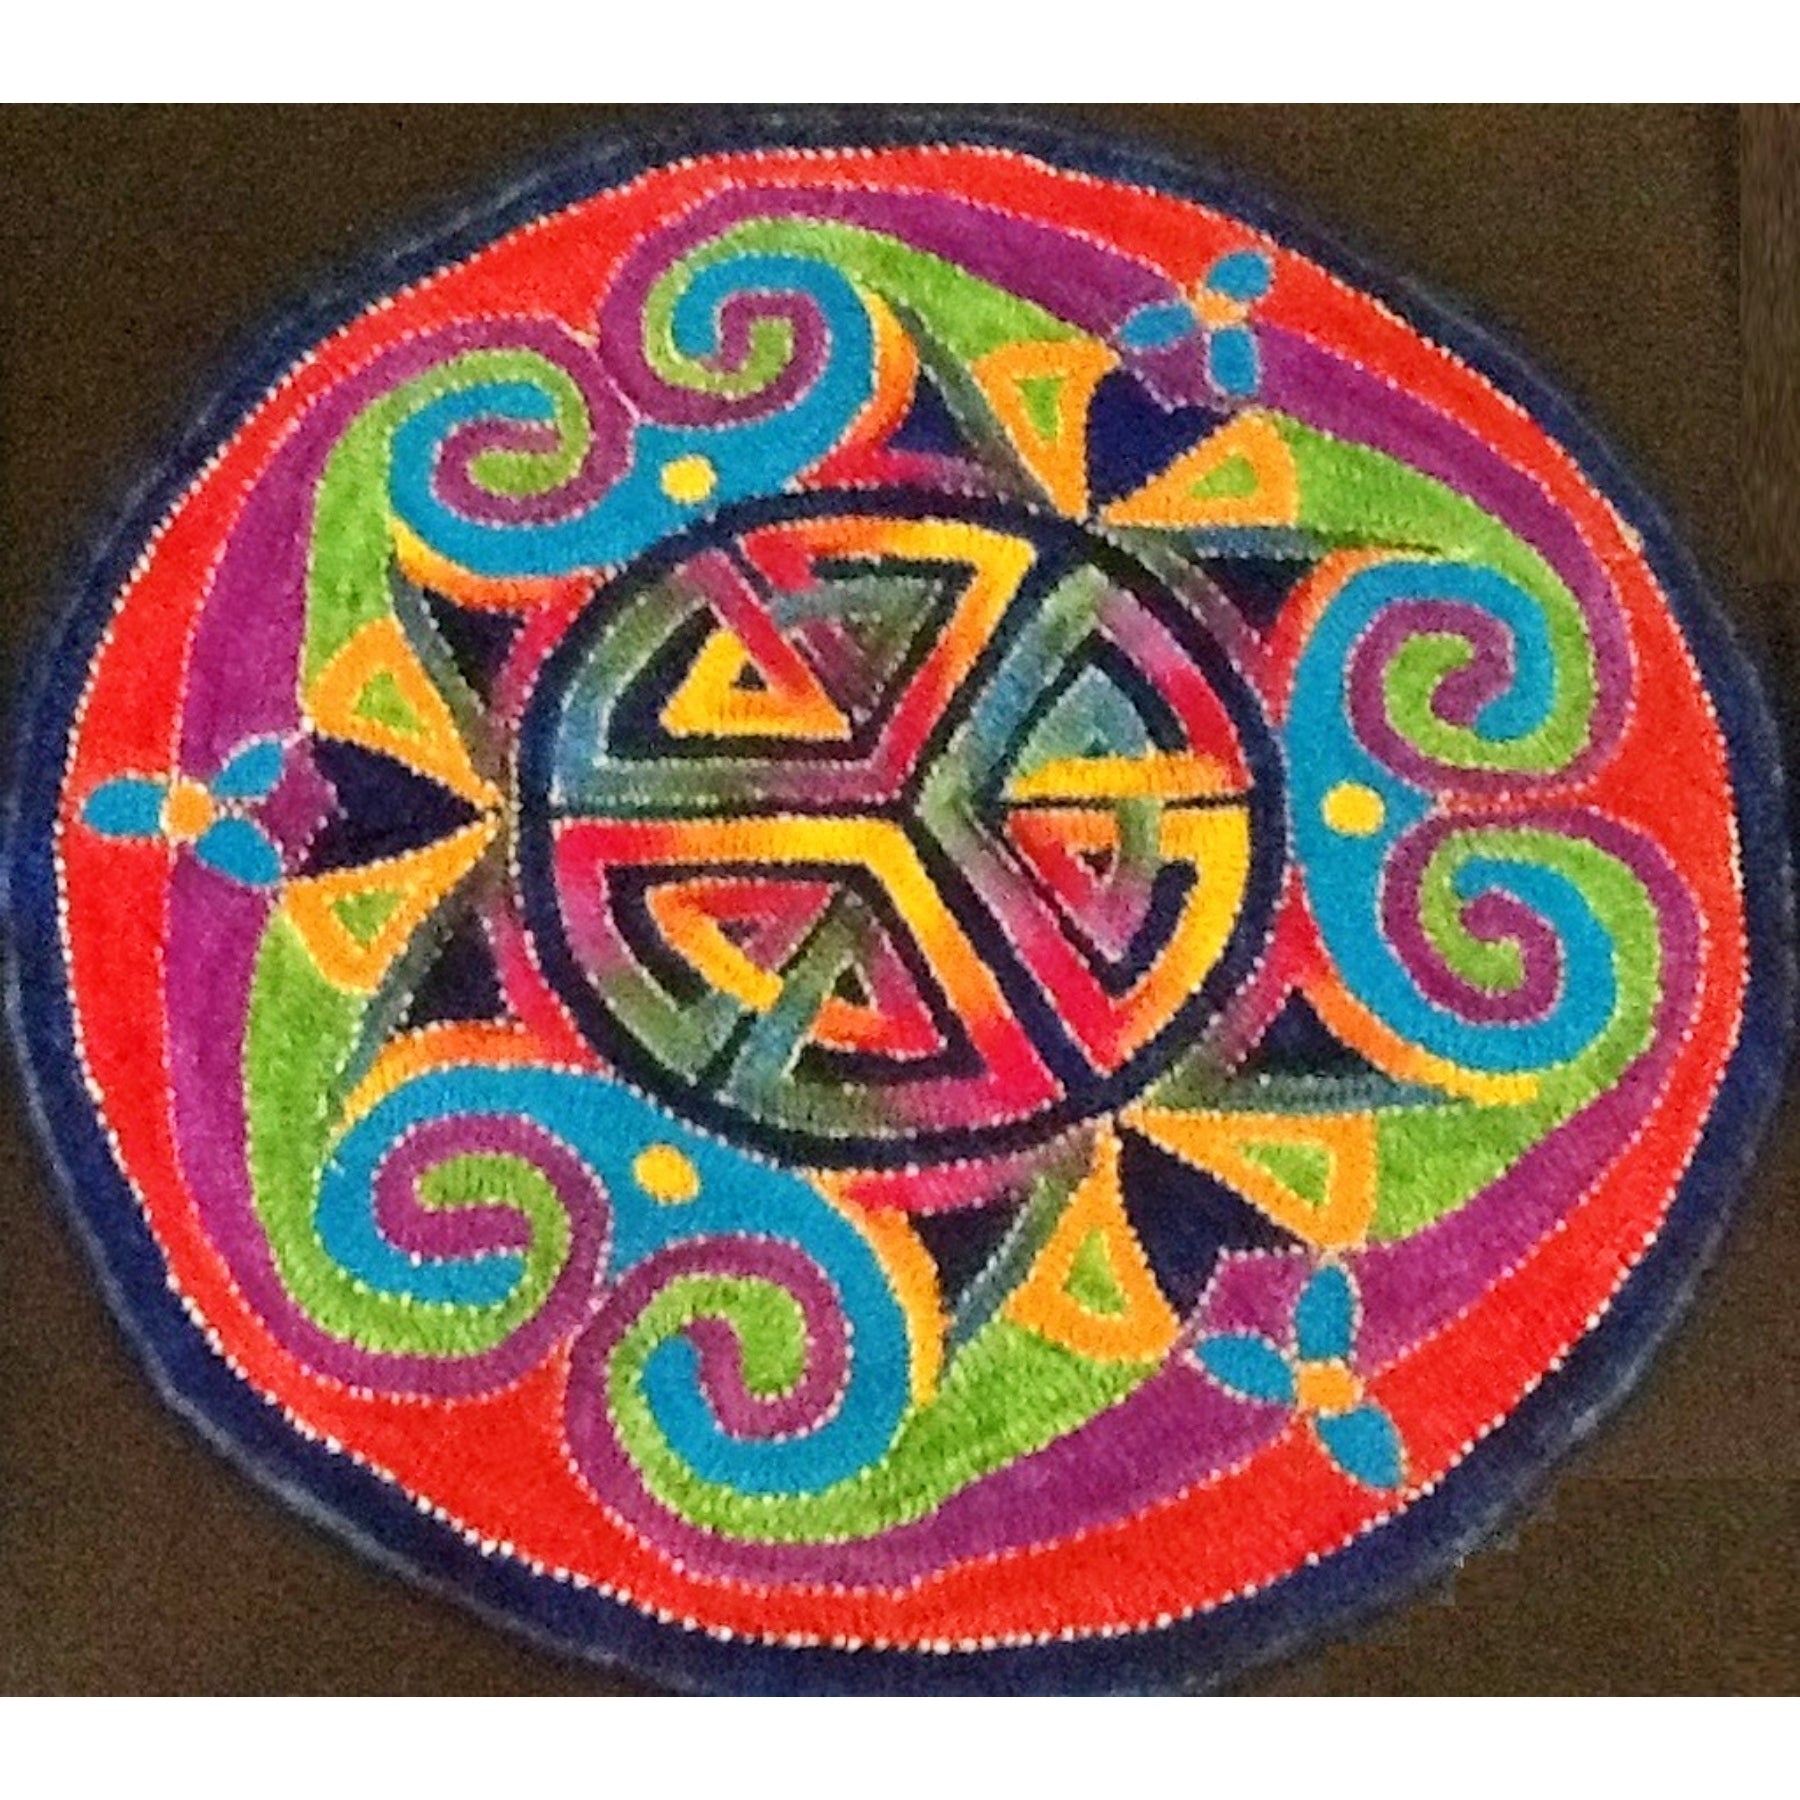 Celtic Roundel, rug hooked by Vivily Powers